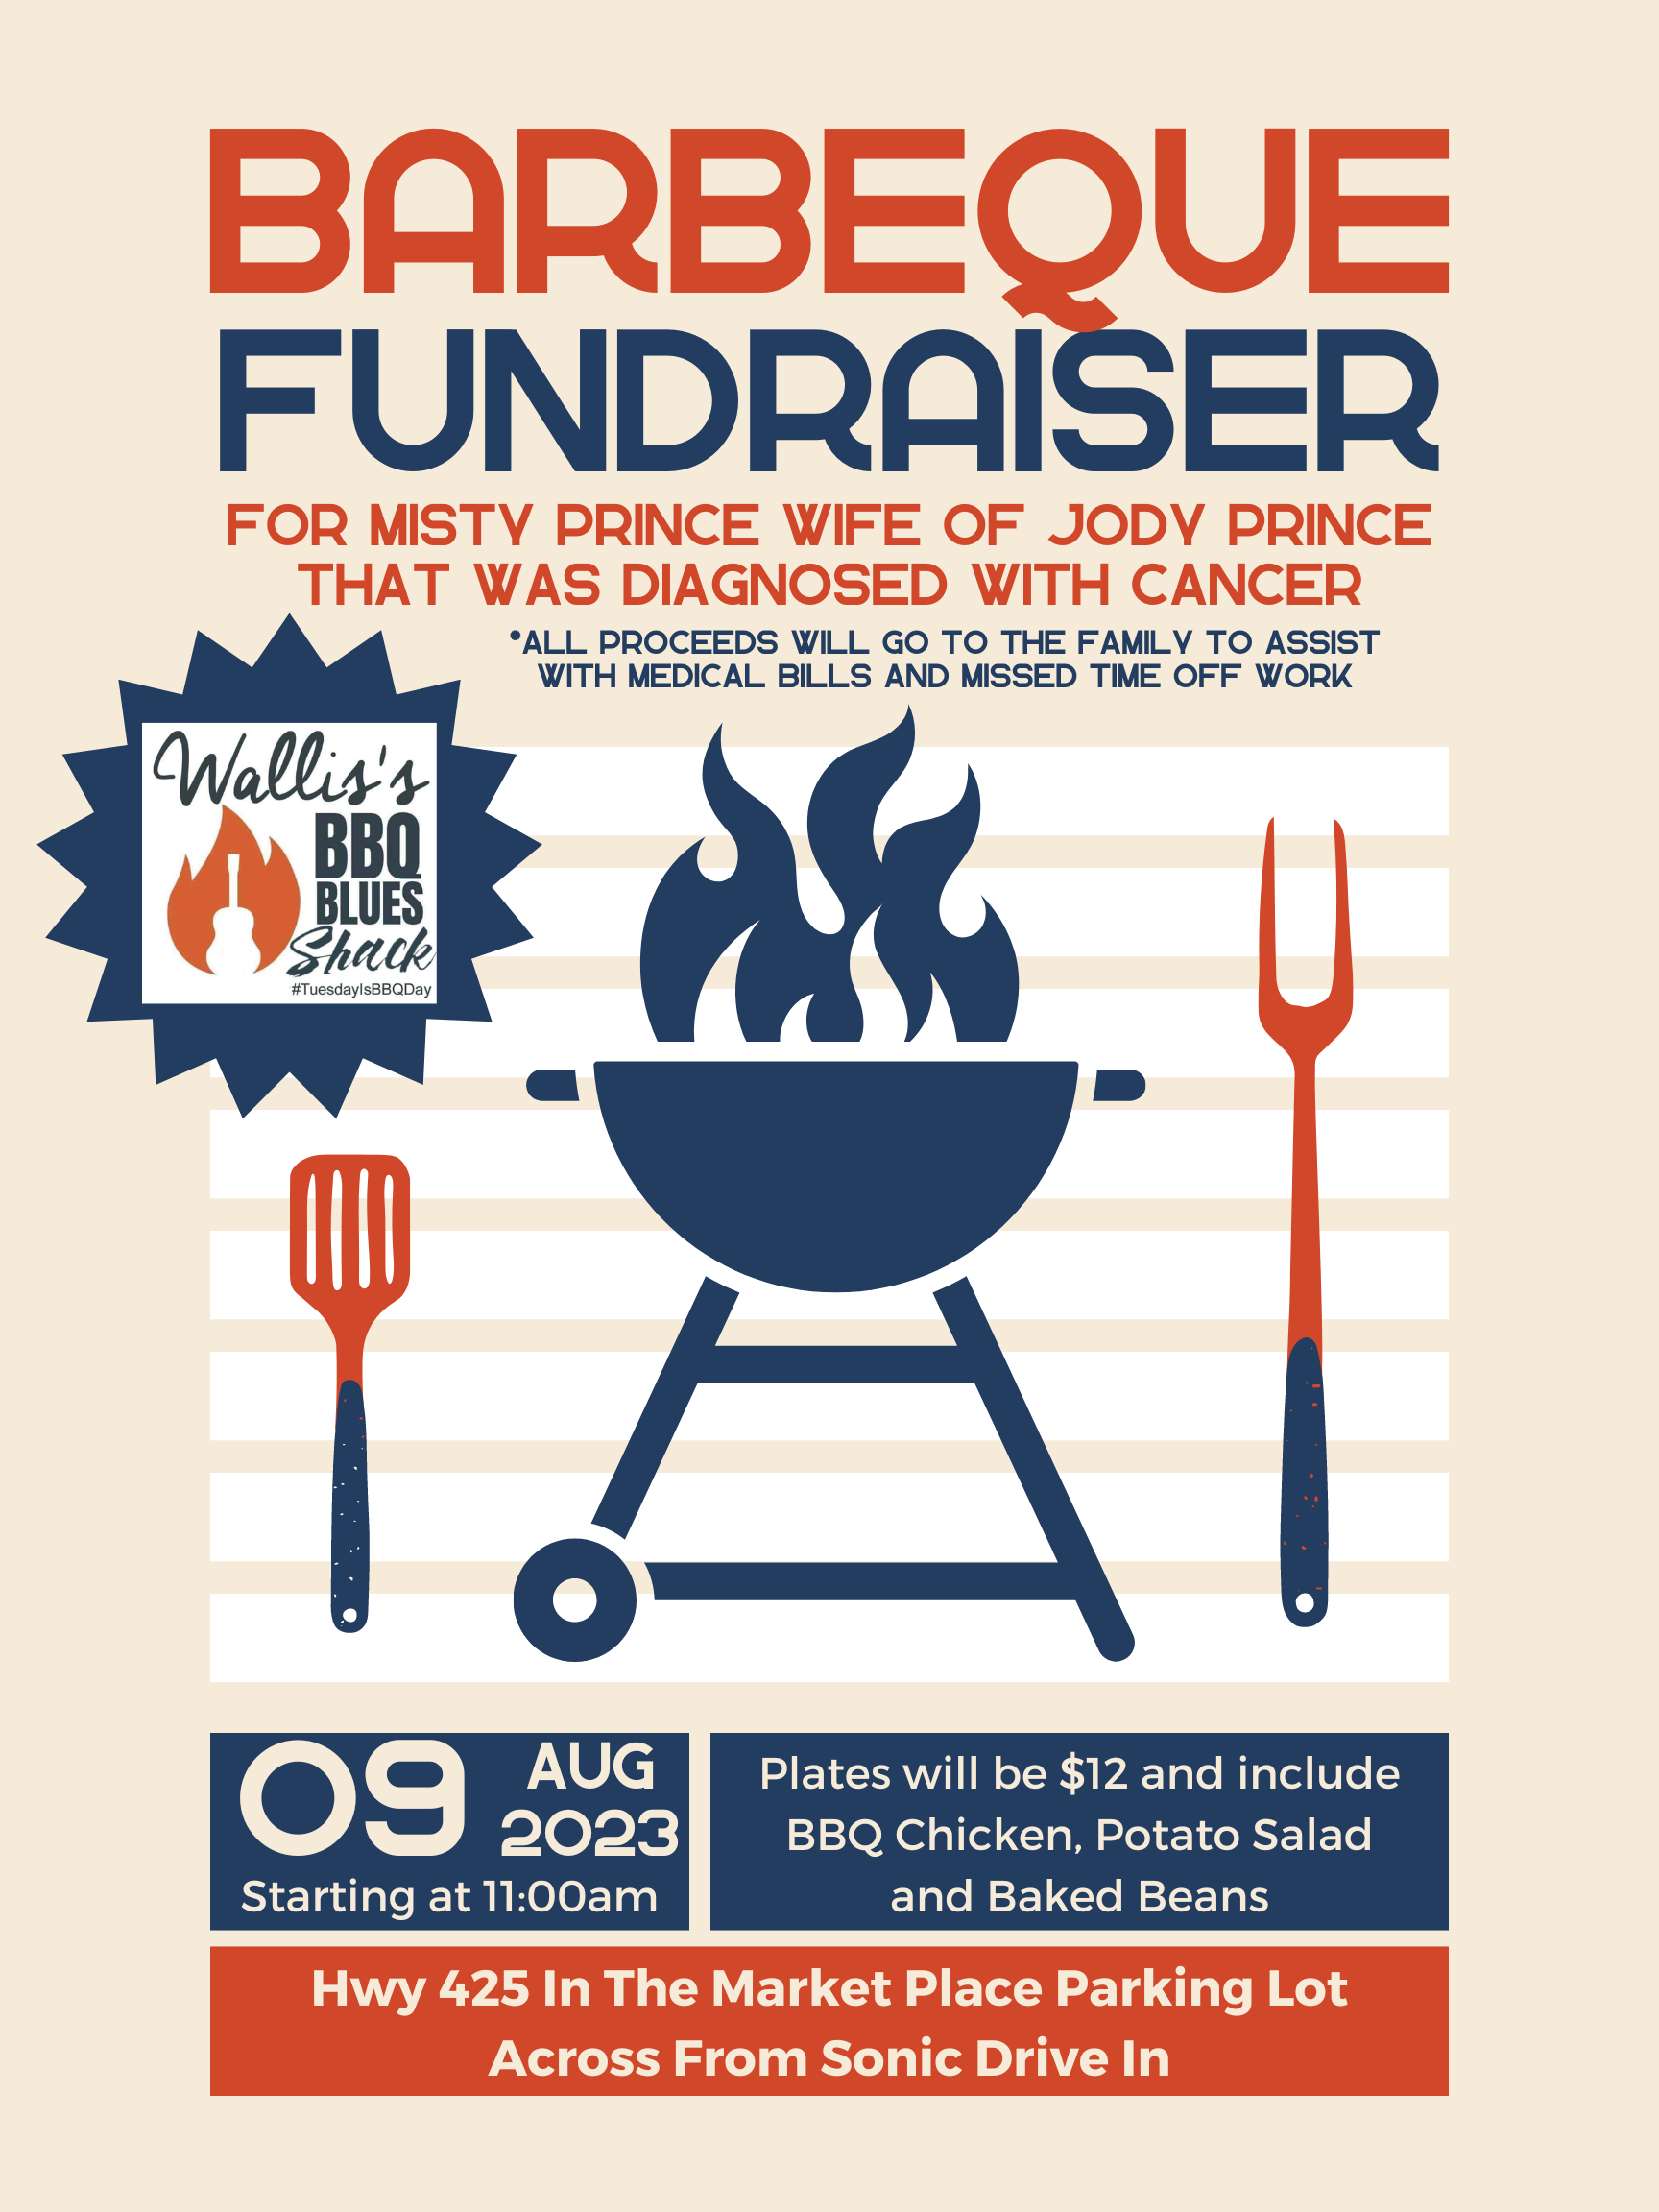 BBQ Fundraiser for Misty Prince